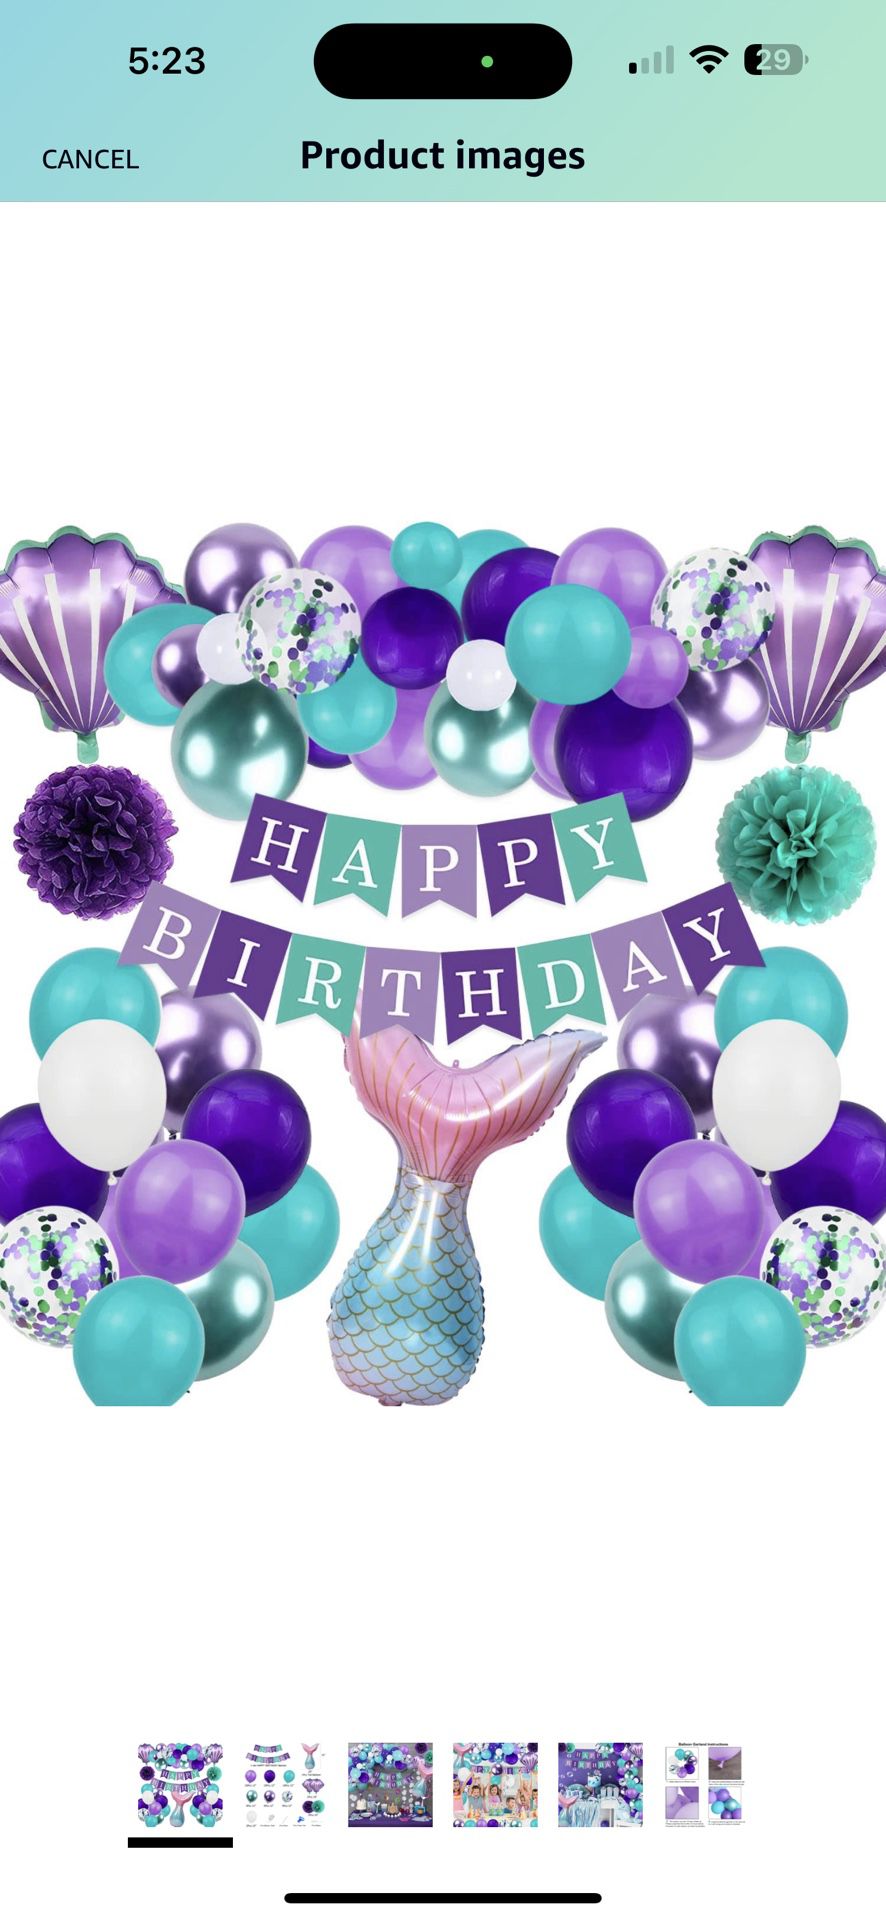 Mermaid Birthday Decorations Girls Little Mermaid Party Balloons Kit with Happy Birthday Banner Tail and Shell Foil Balloons Purple Green Pompom